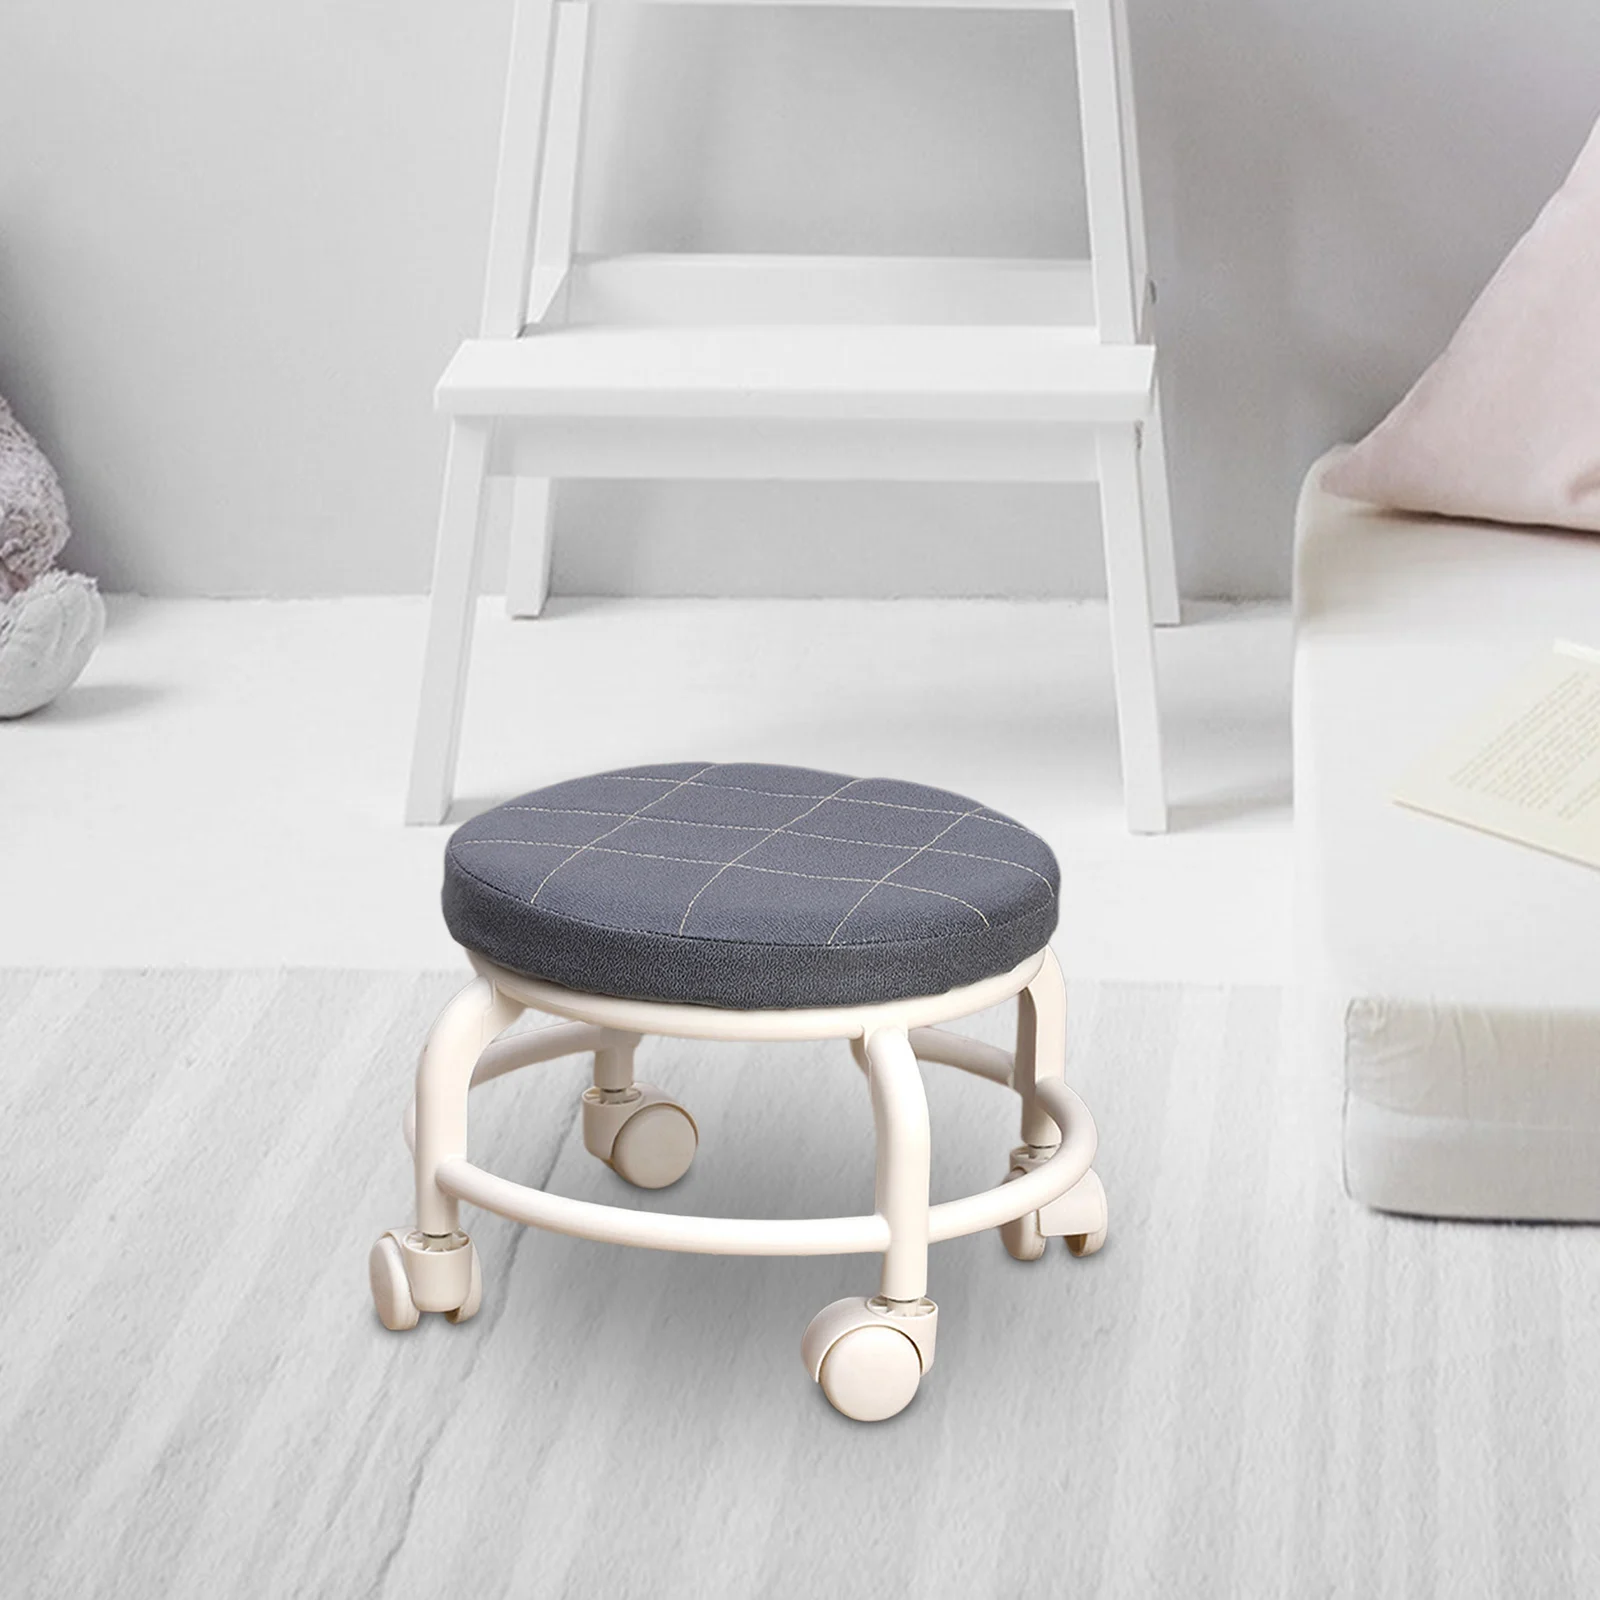 https://ae01.alicdn.com/kf/S72c8af4493ab4093b636efb214a6d22fI/Low-Roller-Seat-Stool-Footrest-Comfortable-360-Degree-Rotating-Rolling-Stool-Movable-Mini-Stool-for-Garage.jpg